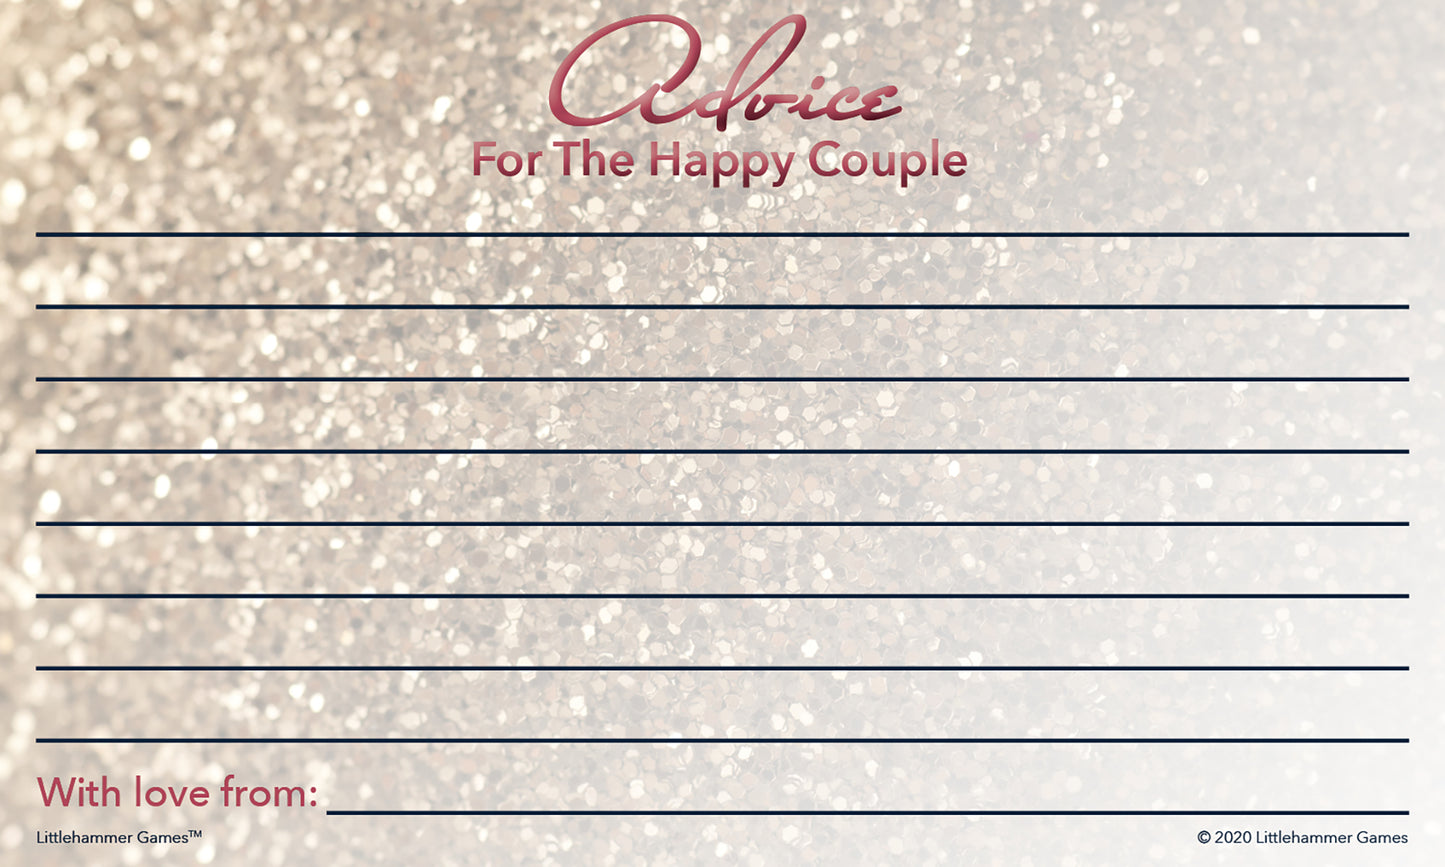 Glittery rose gold Advice for the Happy Couple cards